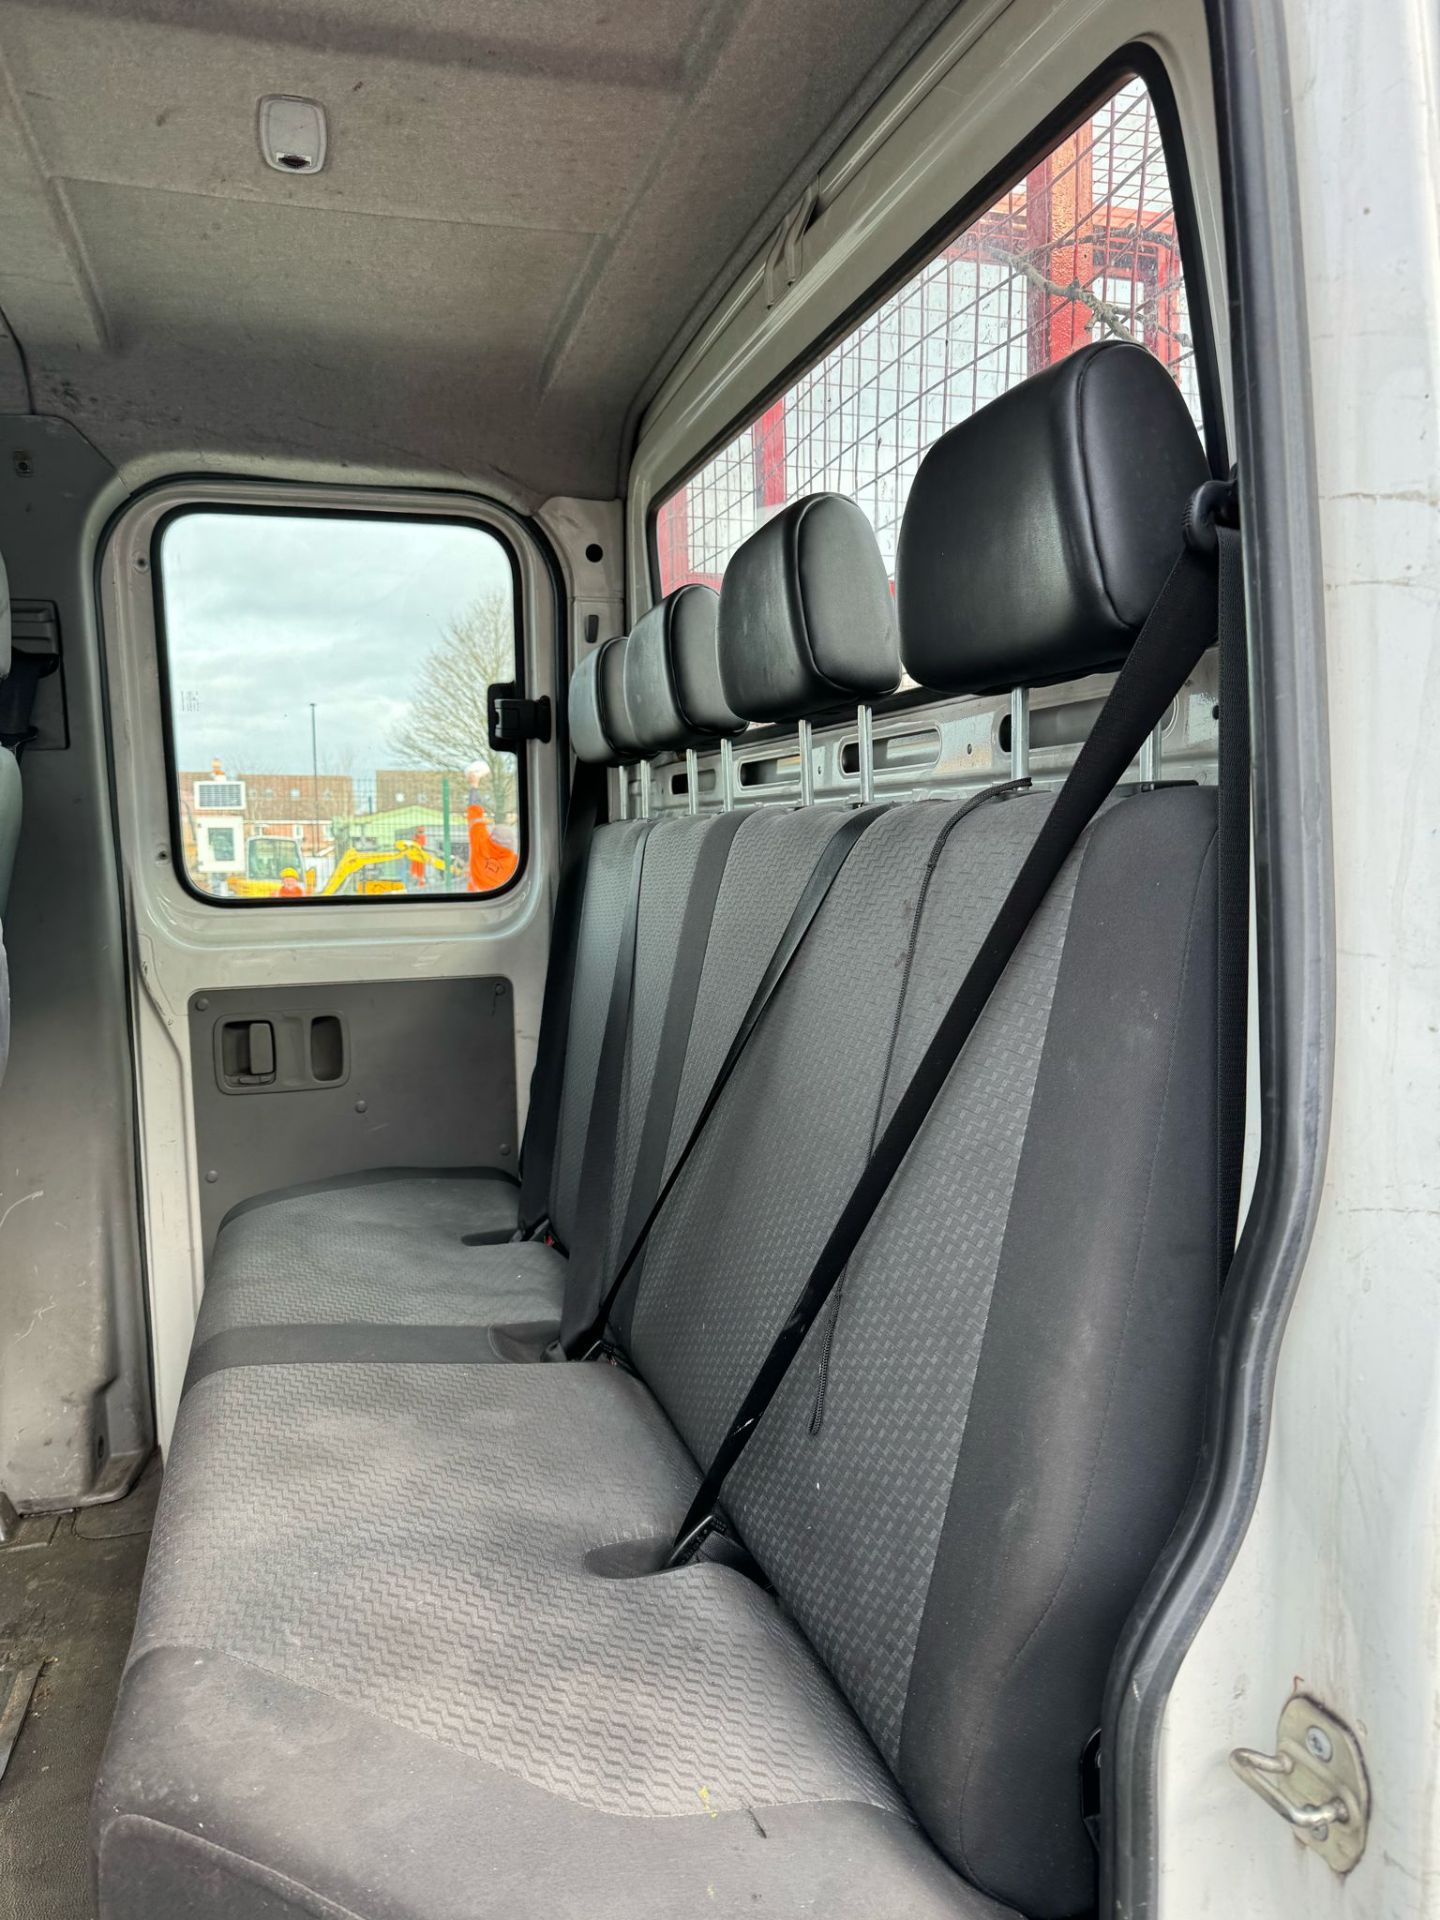 2013 - Volkswagen Crafter, Caged Tipper (Ex-Council Owned & Maintained) - Image 19 of 25